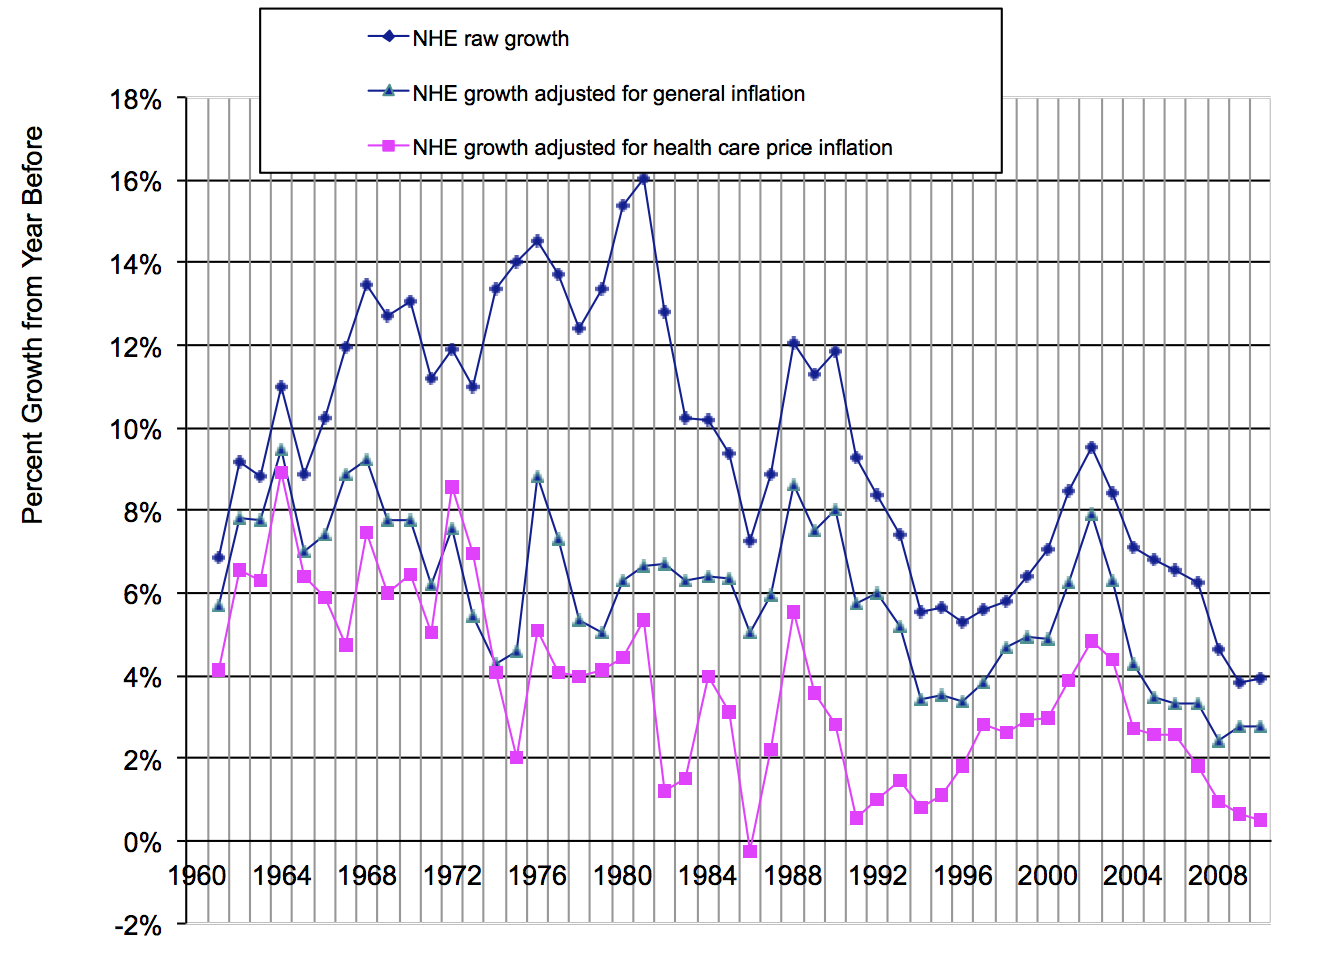 NHE growth rates adjusted for inflation